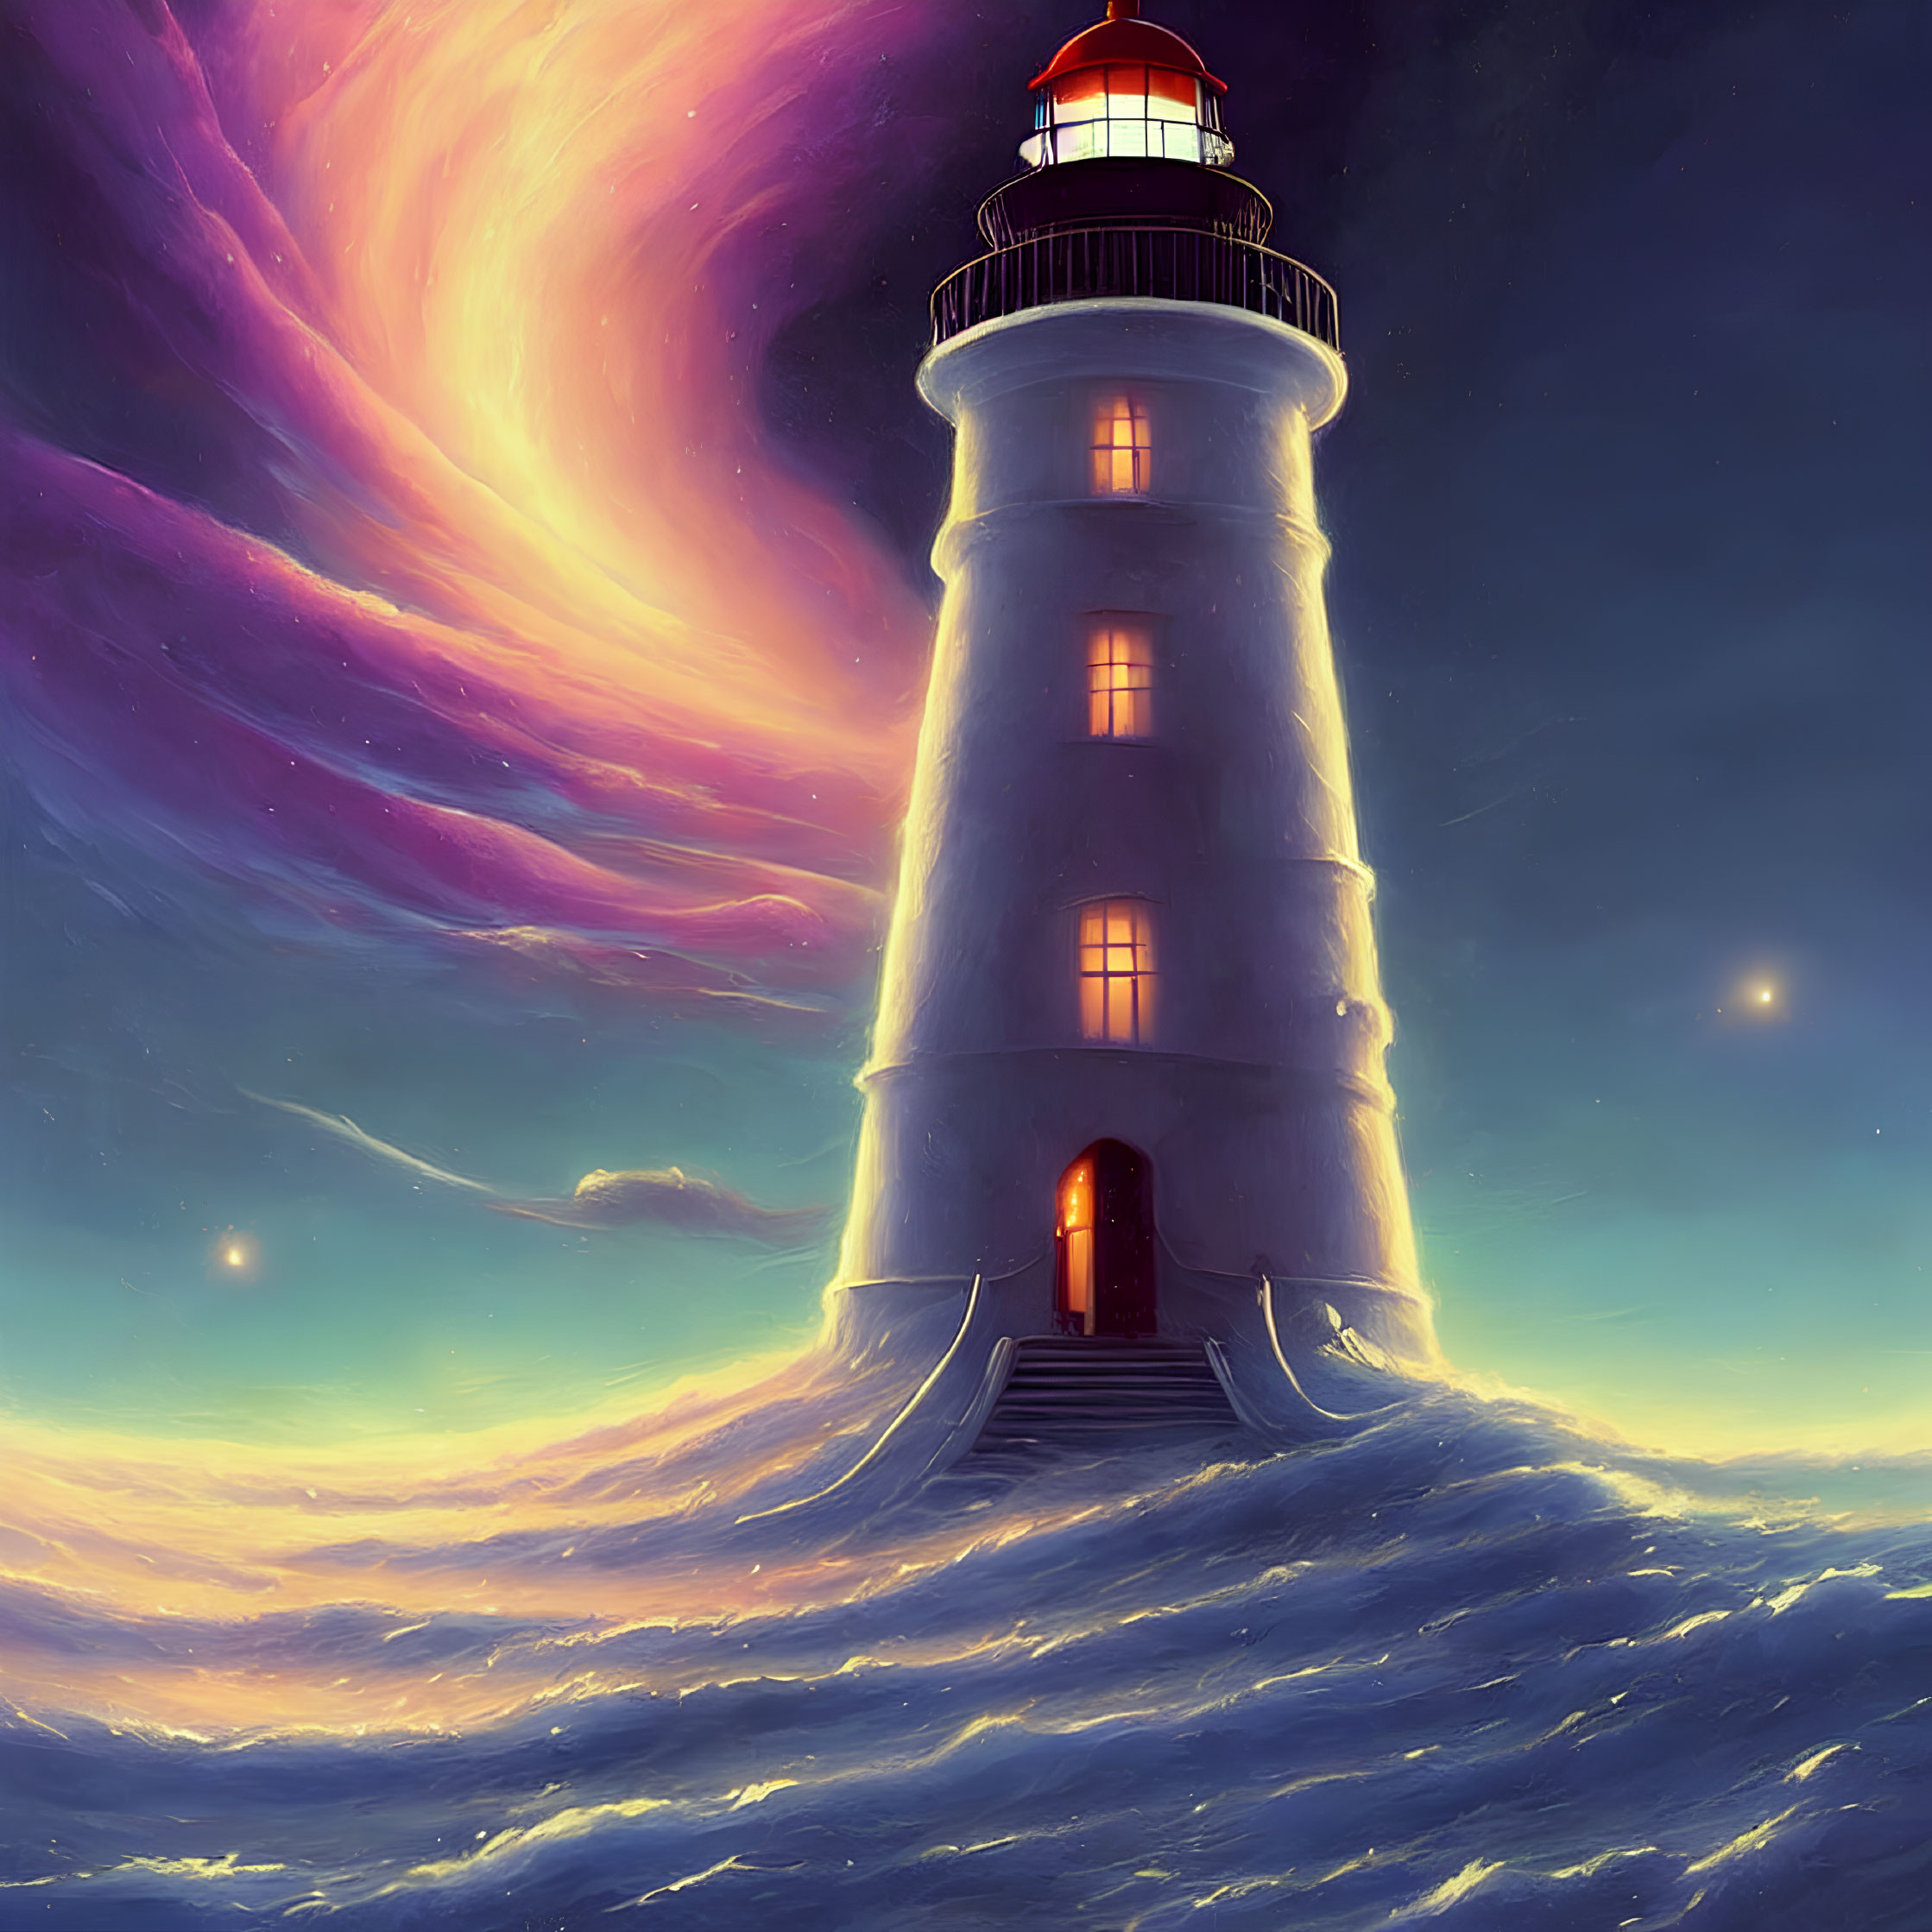 Illustrated lighthouse in twilight ocean scene with purple clouds and stars